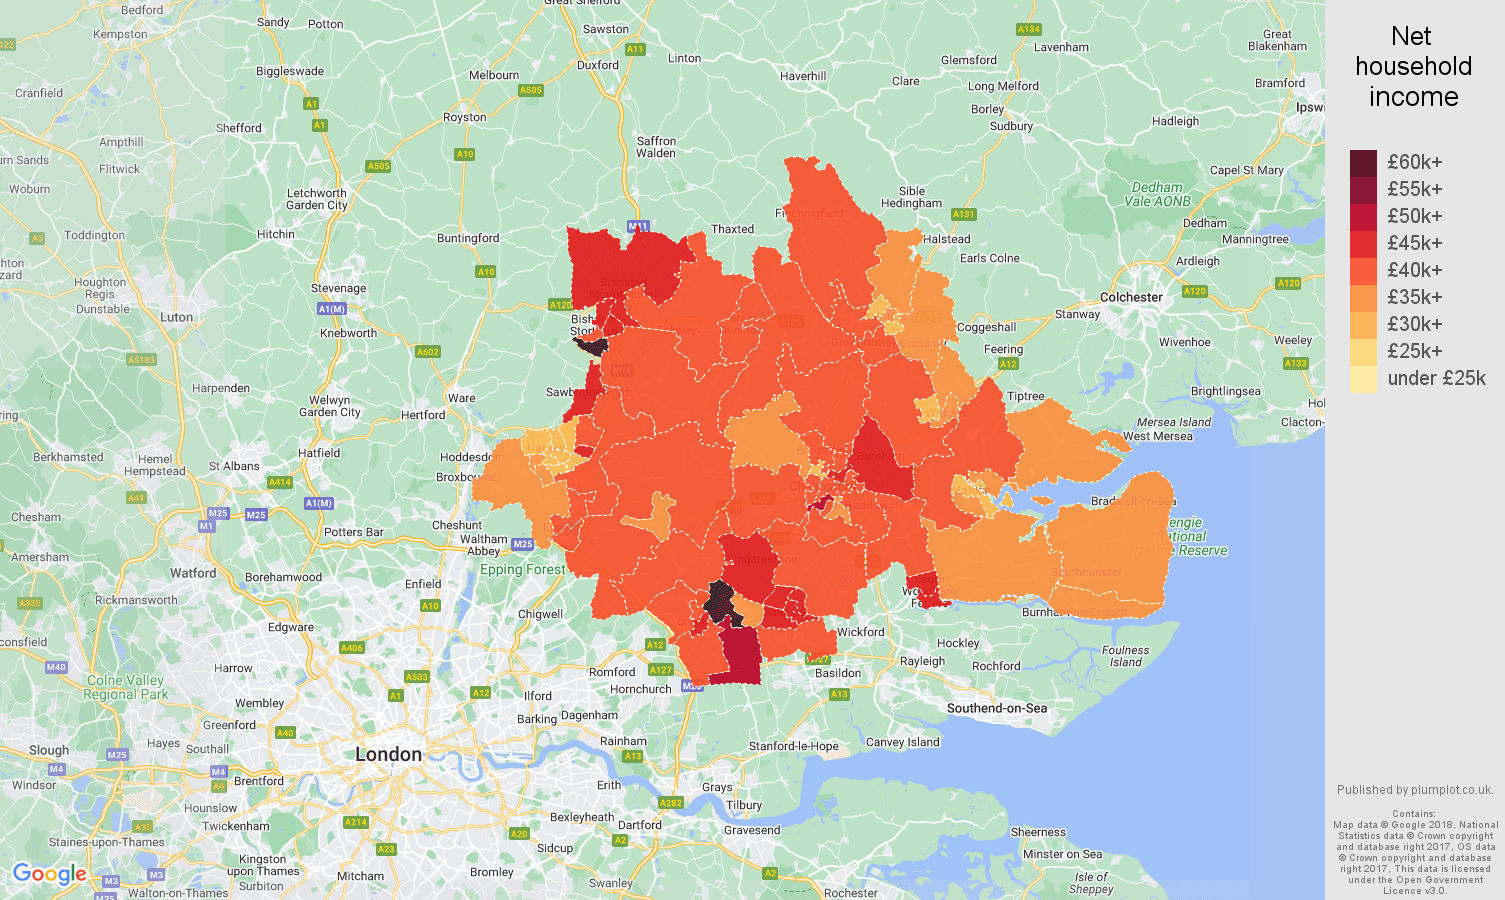 Chelmsford net household income map